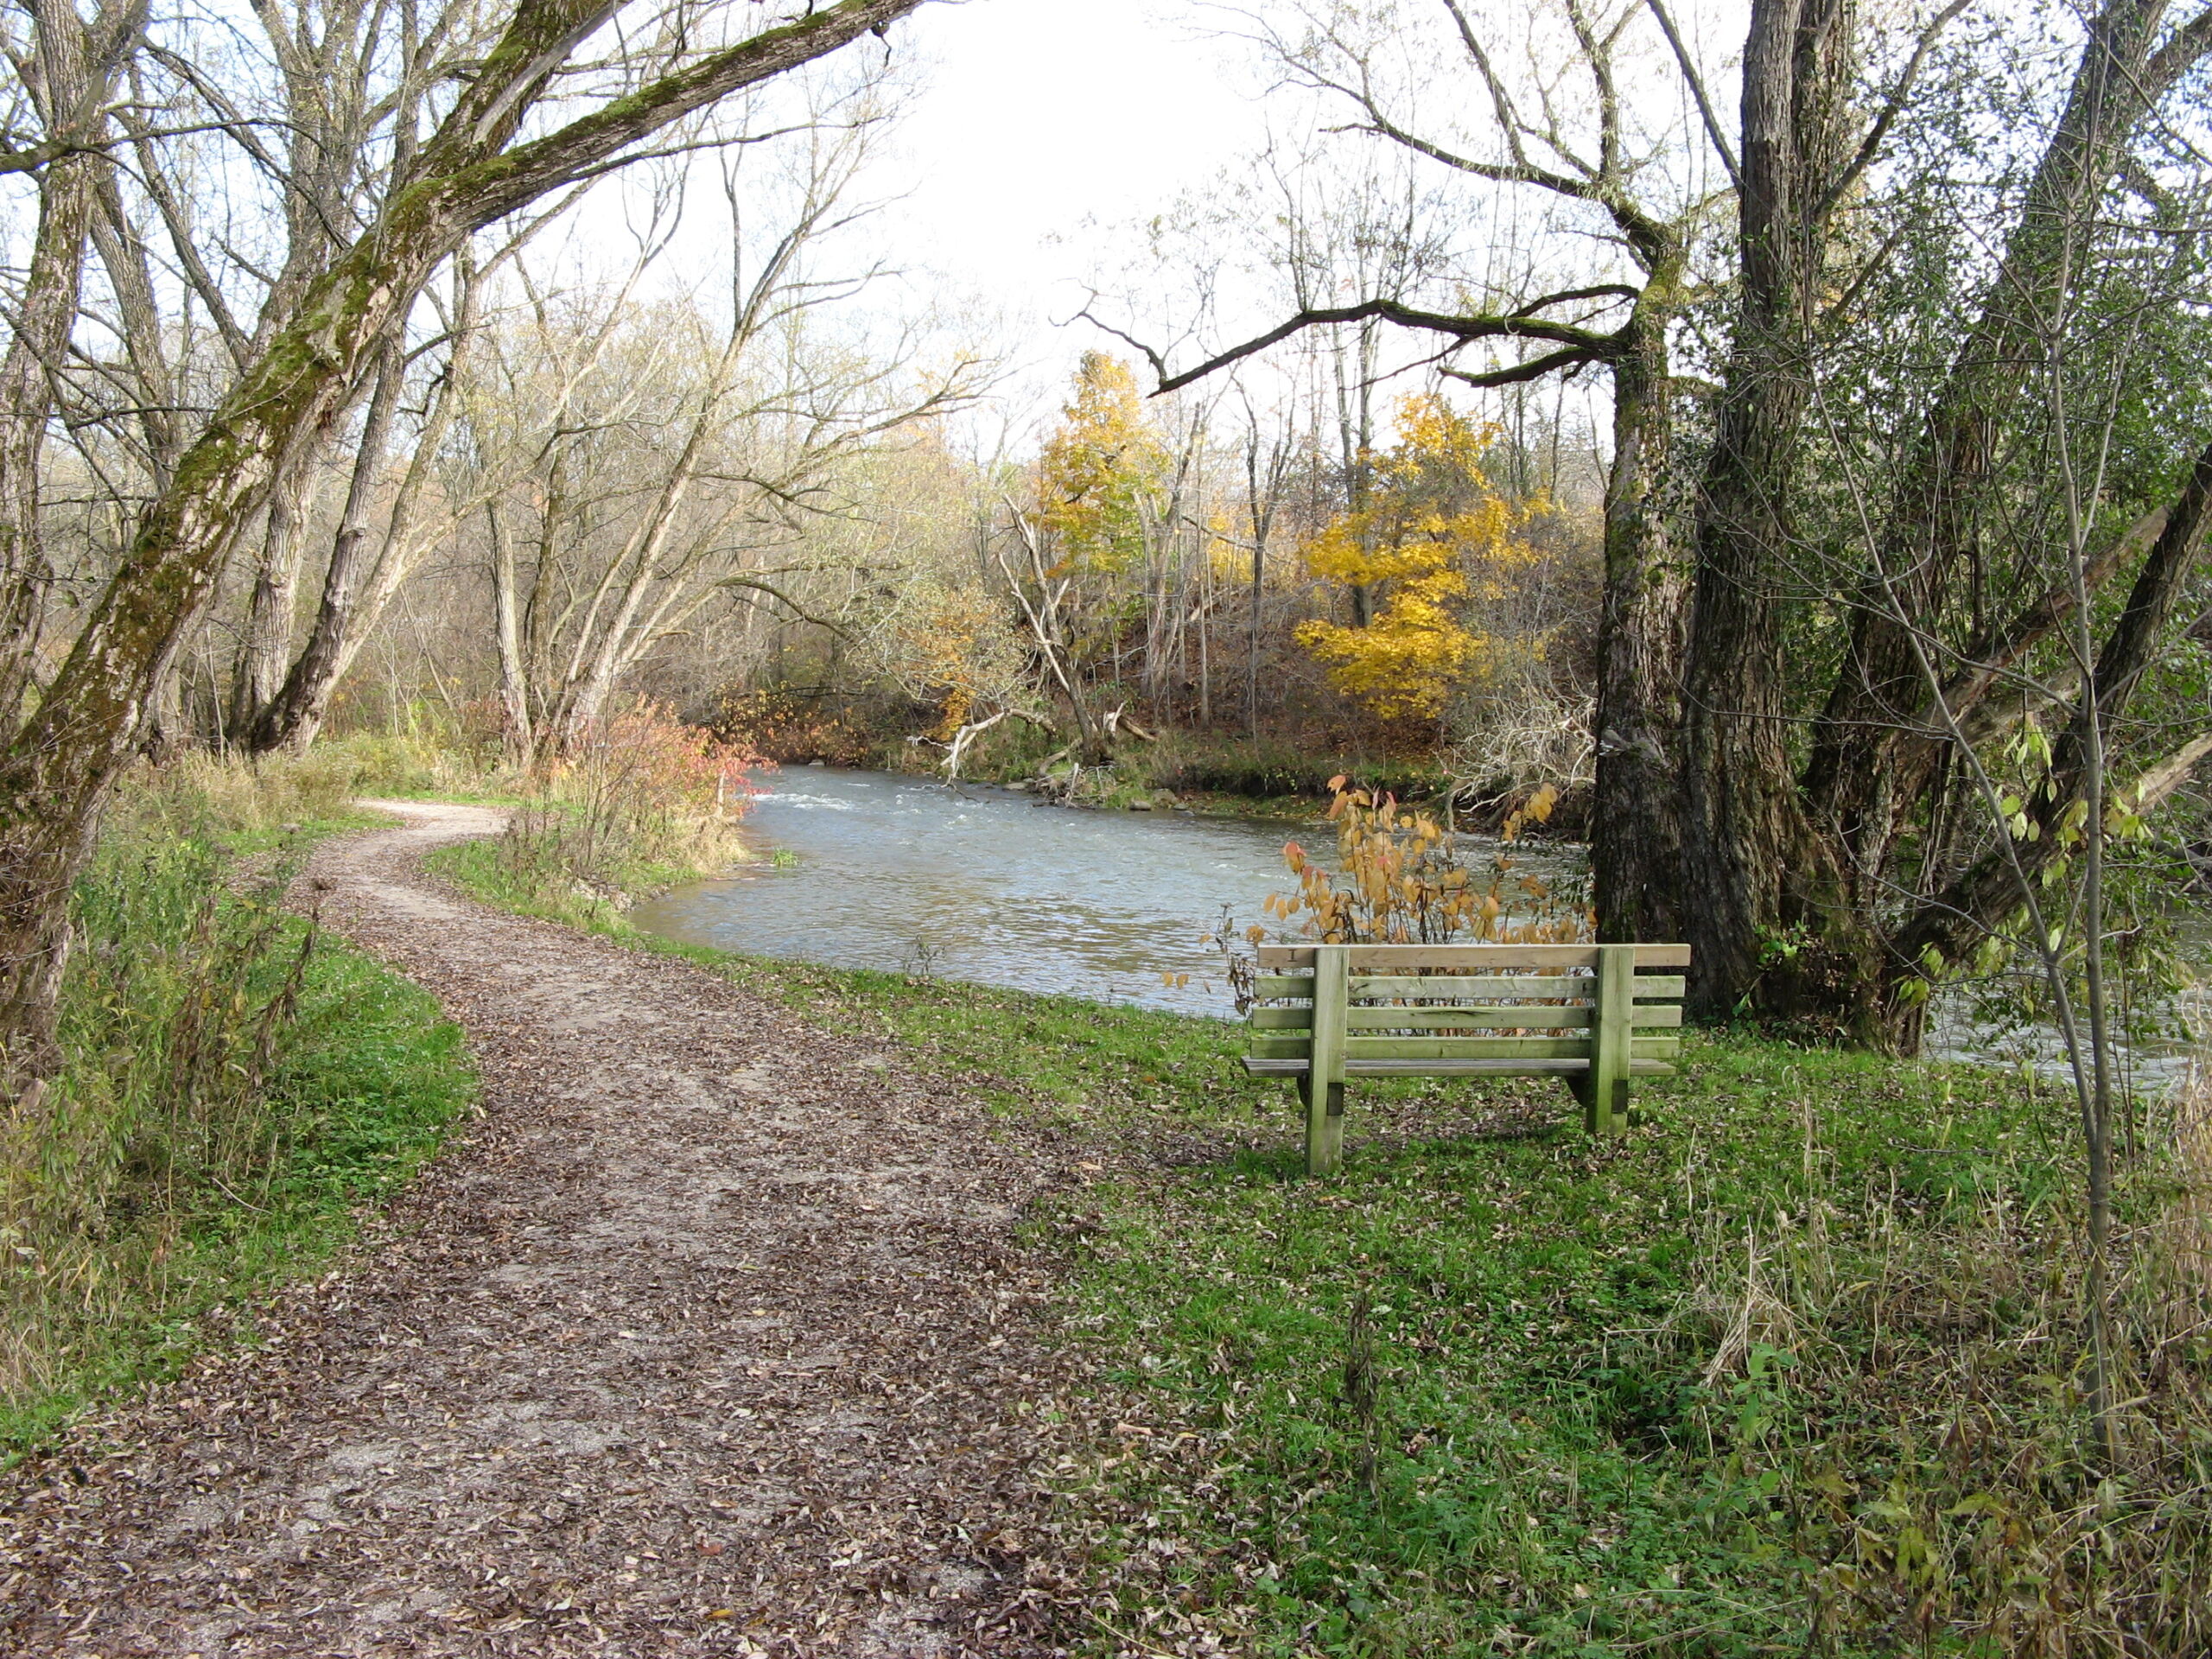 A dirt trail meanders along a river.